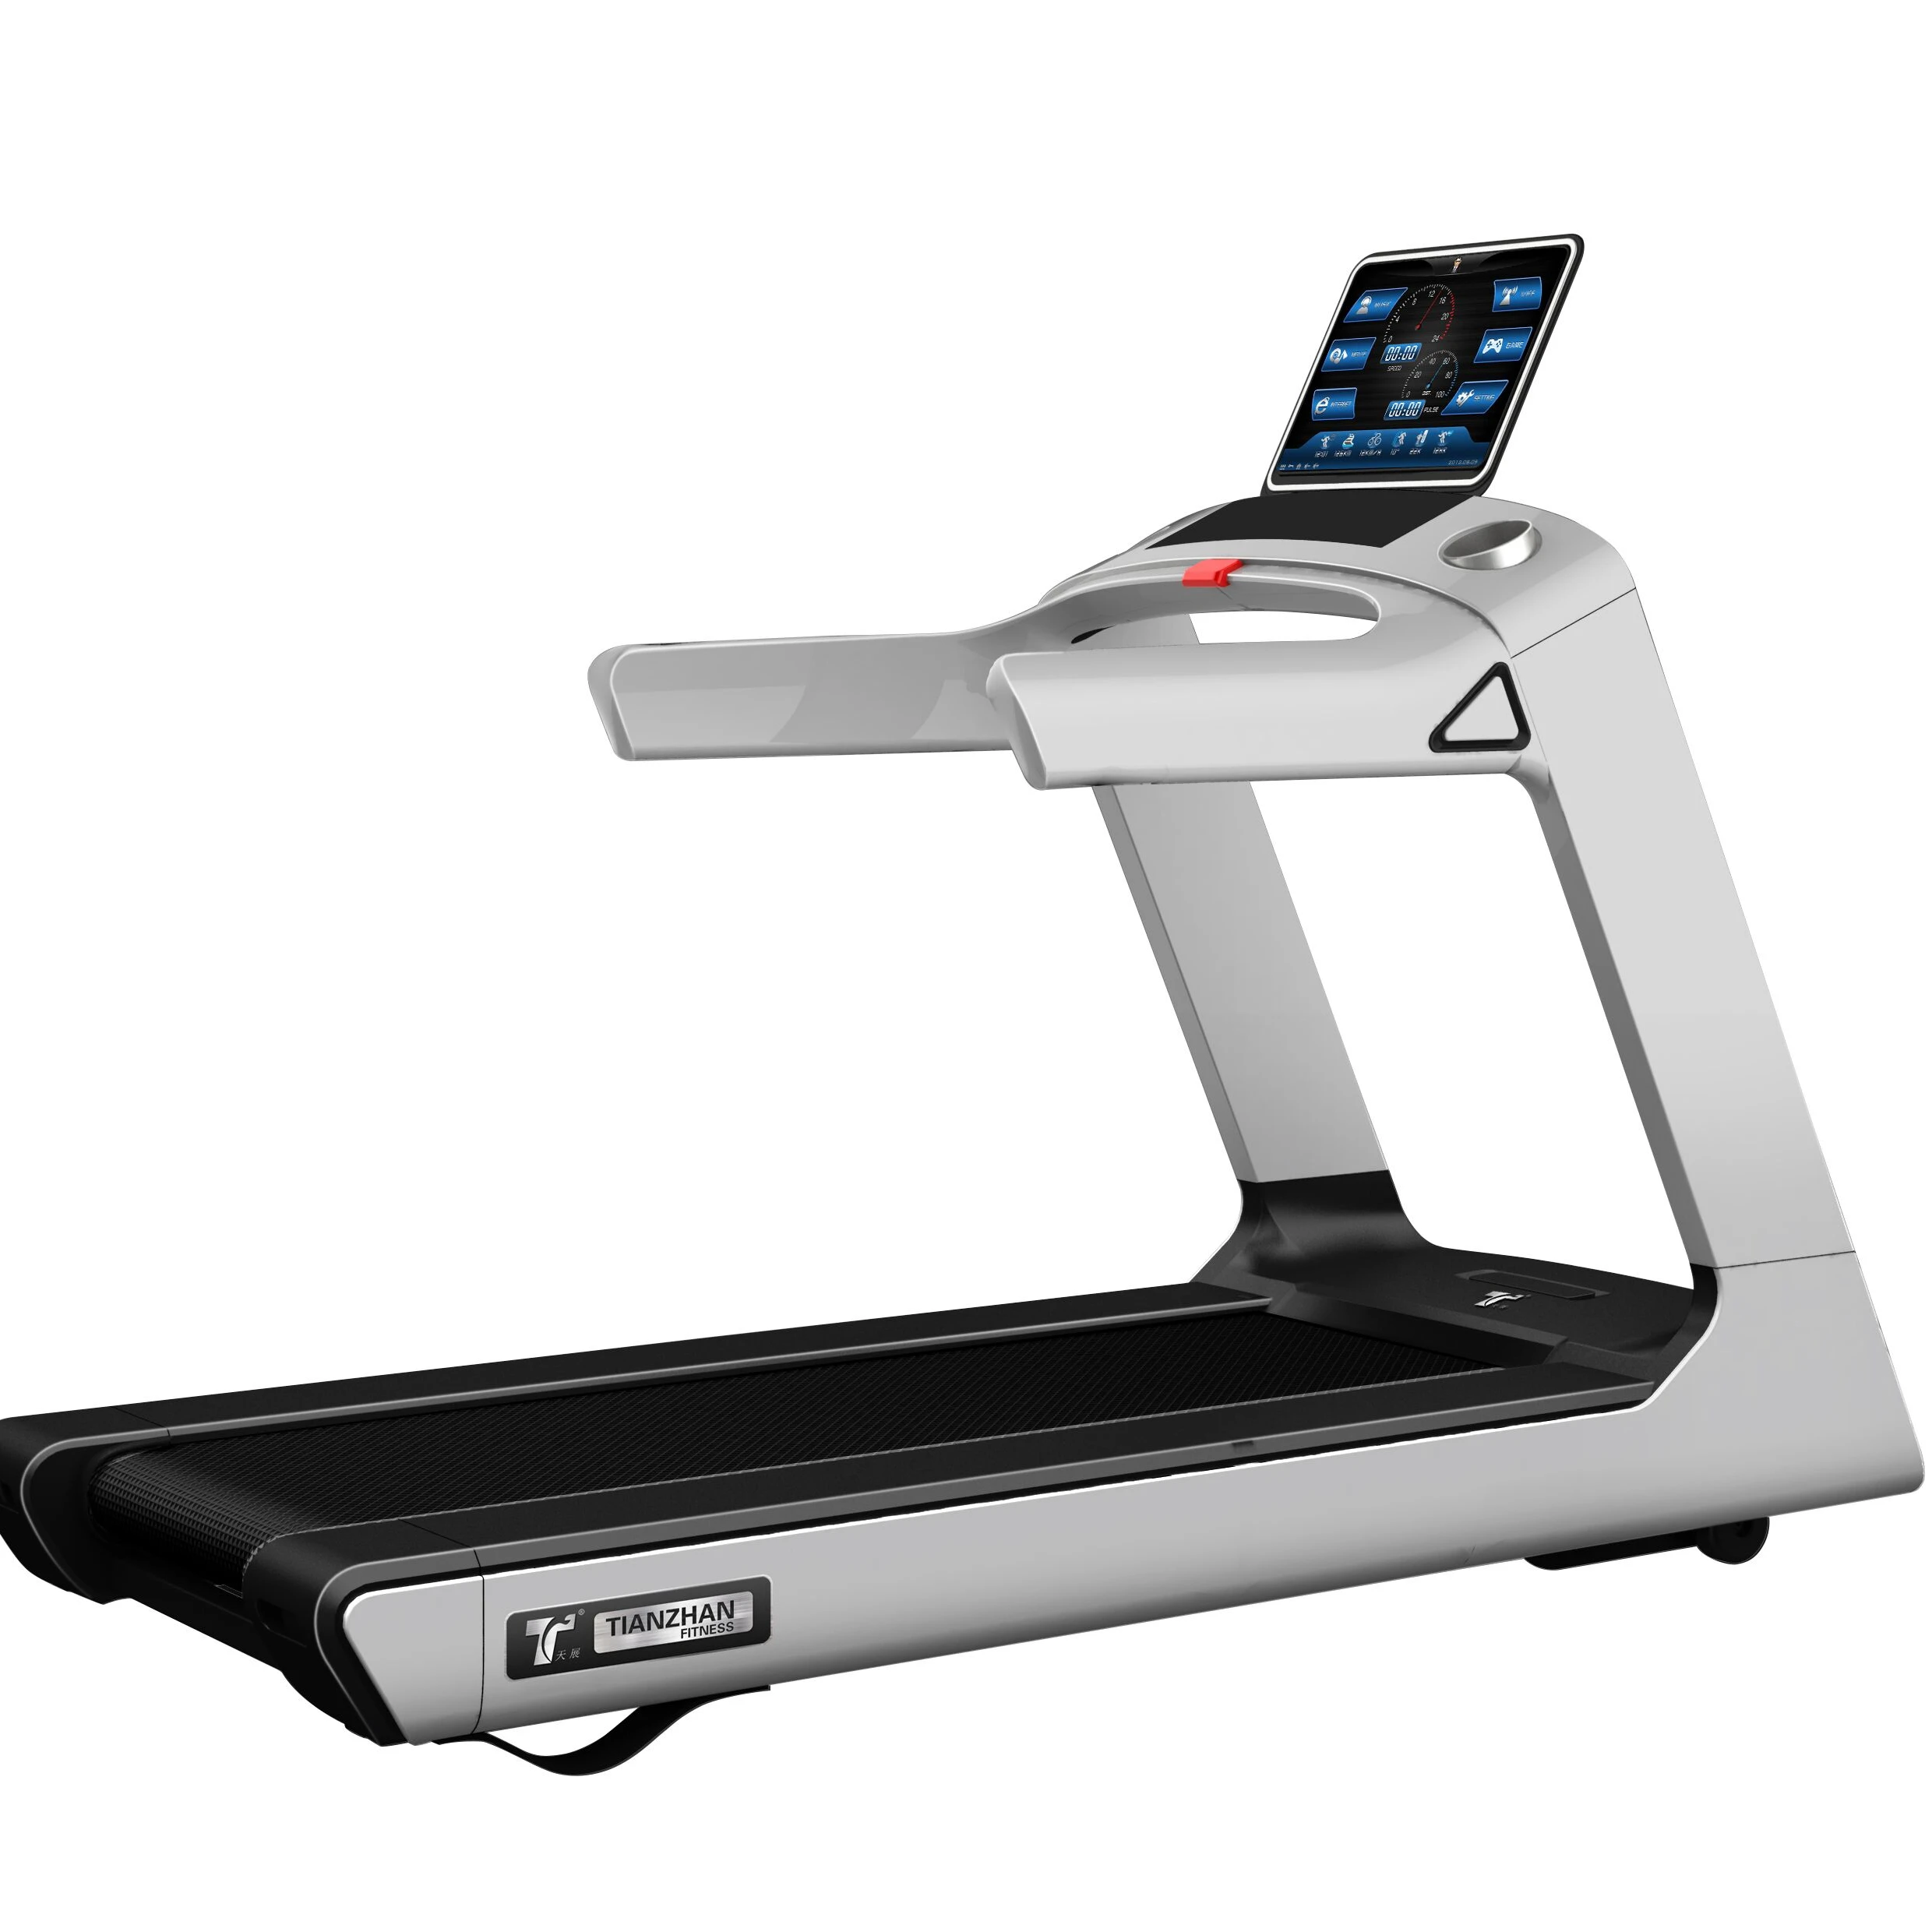 

Hot Sale high-end Commercial Treadmill / running machine / Cardio fitness TZ-7000 Key Screen